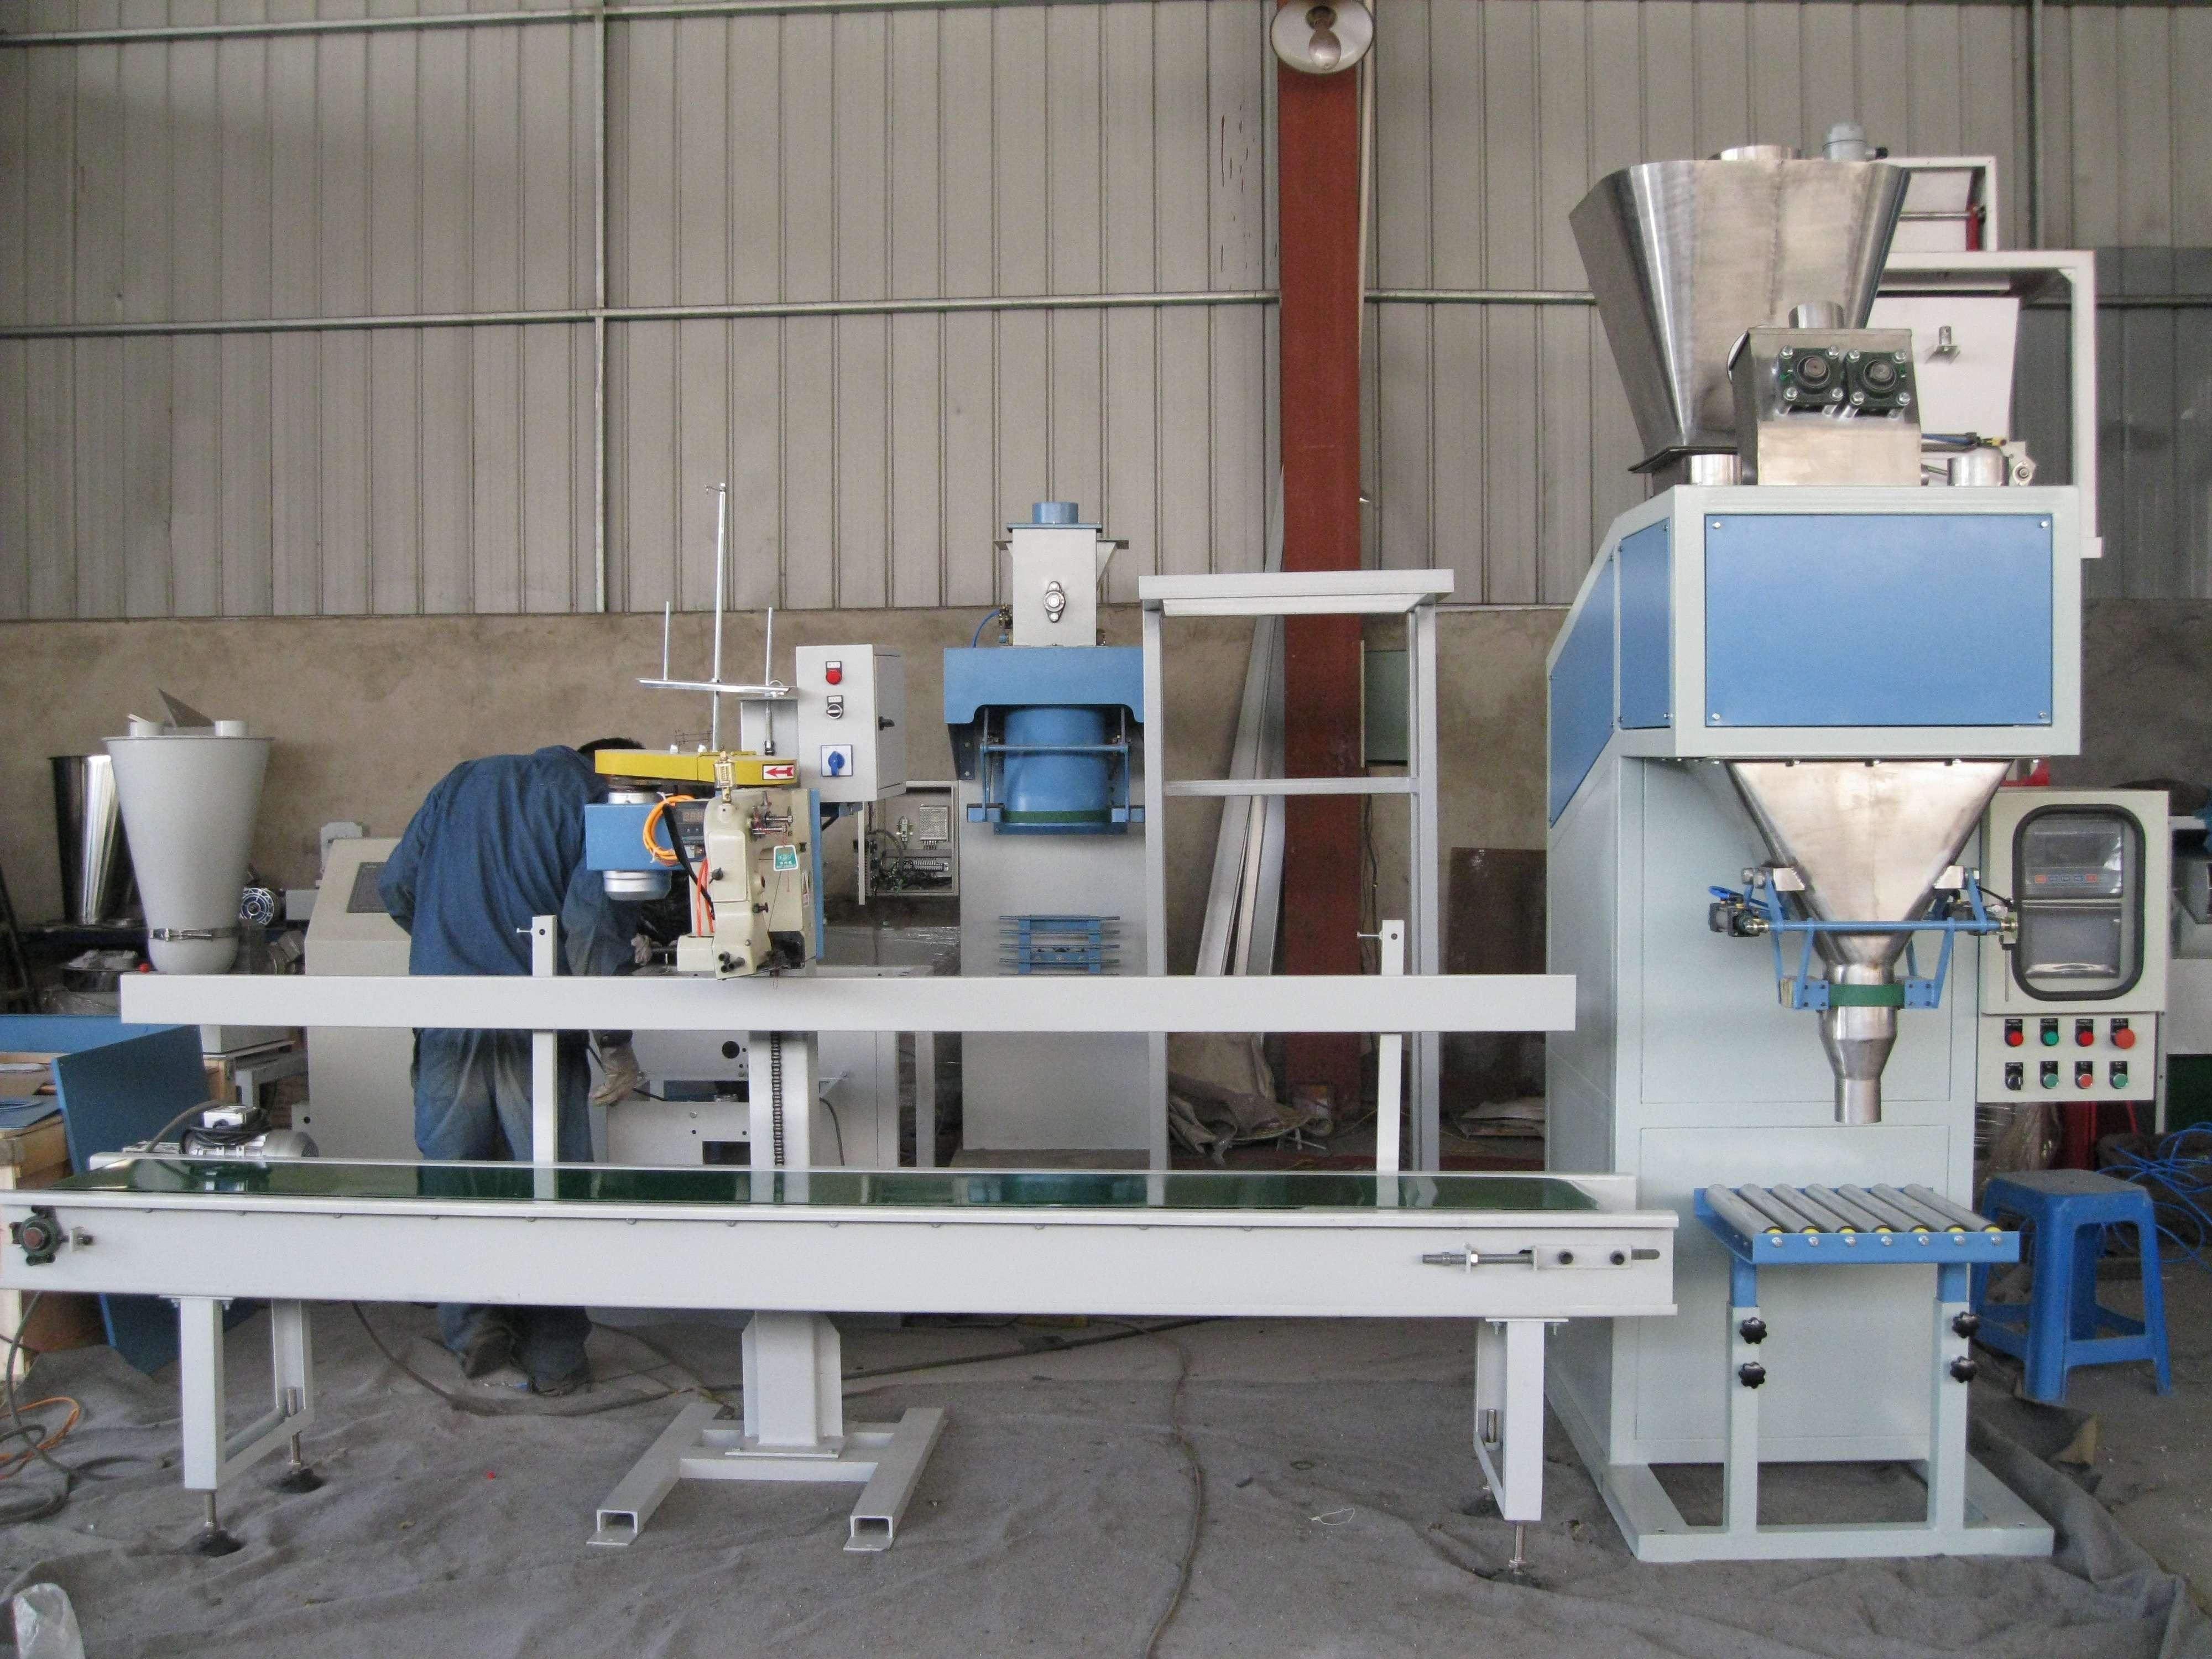 organic flour bagging machine, natural flour bagging system, wheat flour bagging line, automated bagging system produced by WUXI HY MACHINERY CO., LTD